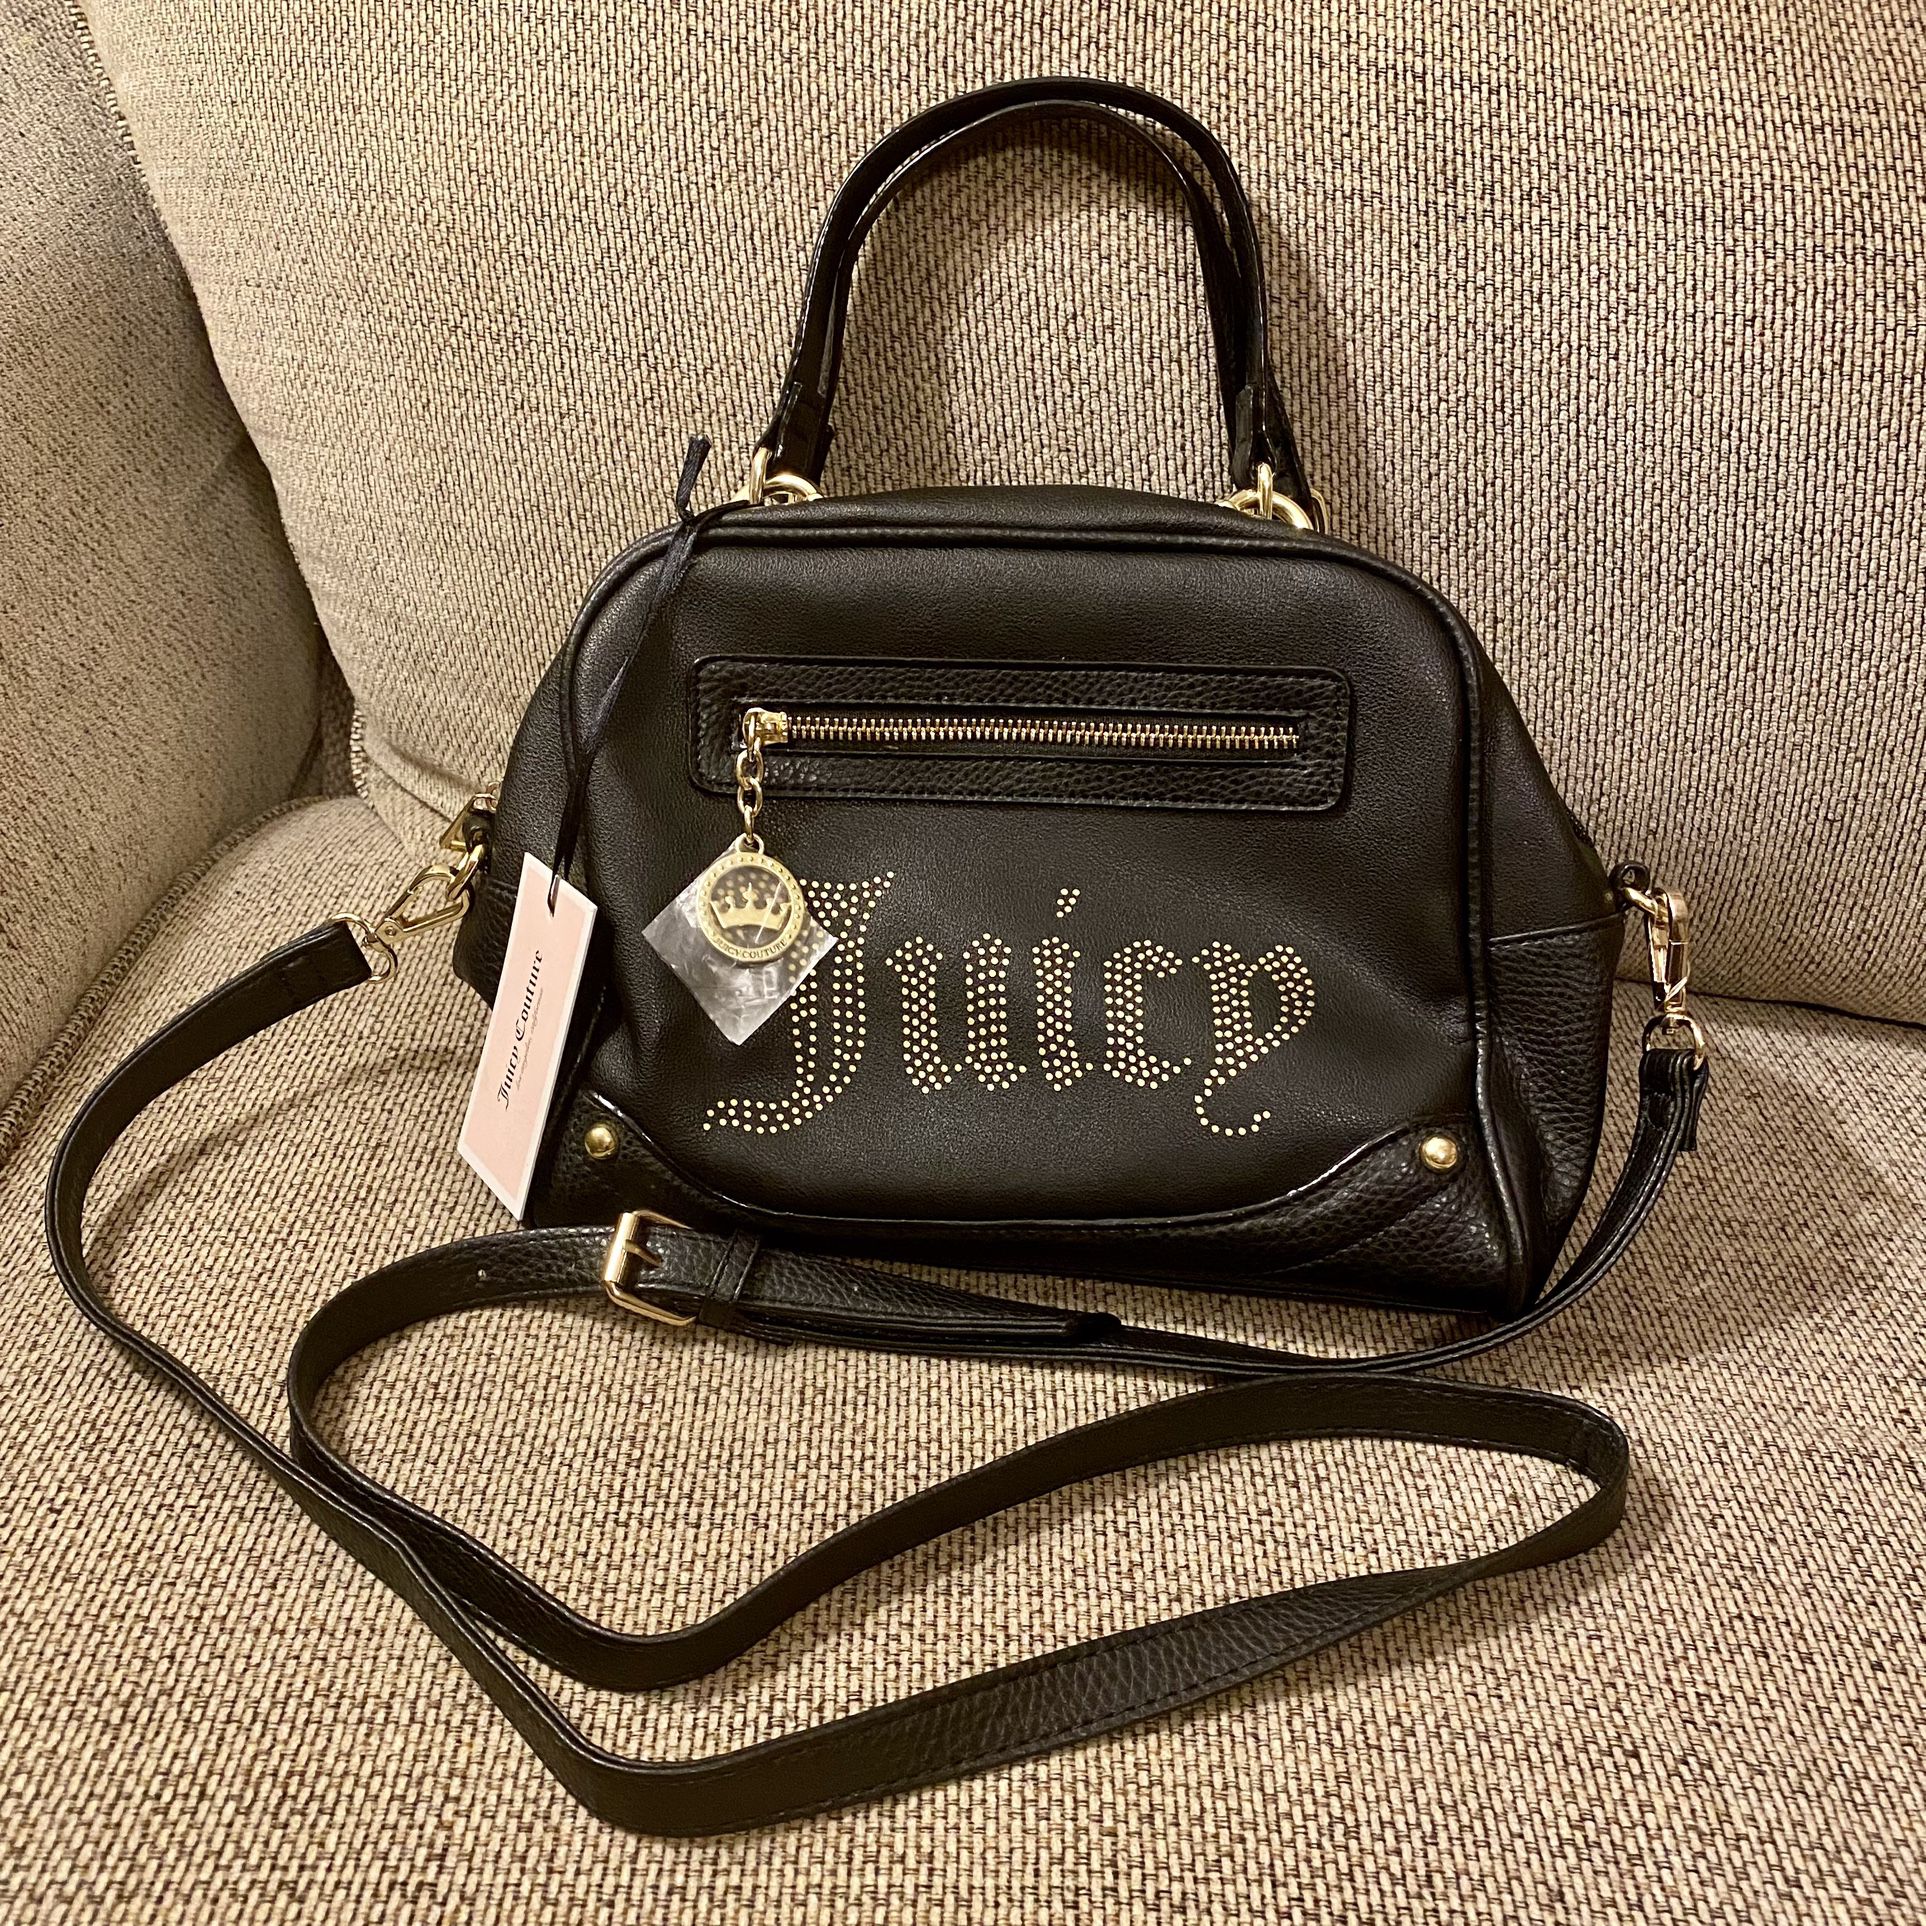 New Juicy Couture Desert Light Satchel with Extra Crossbody Strap Black